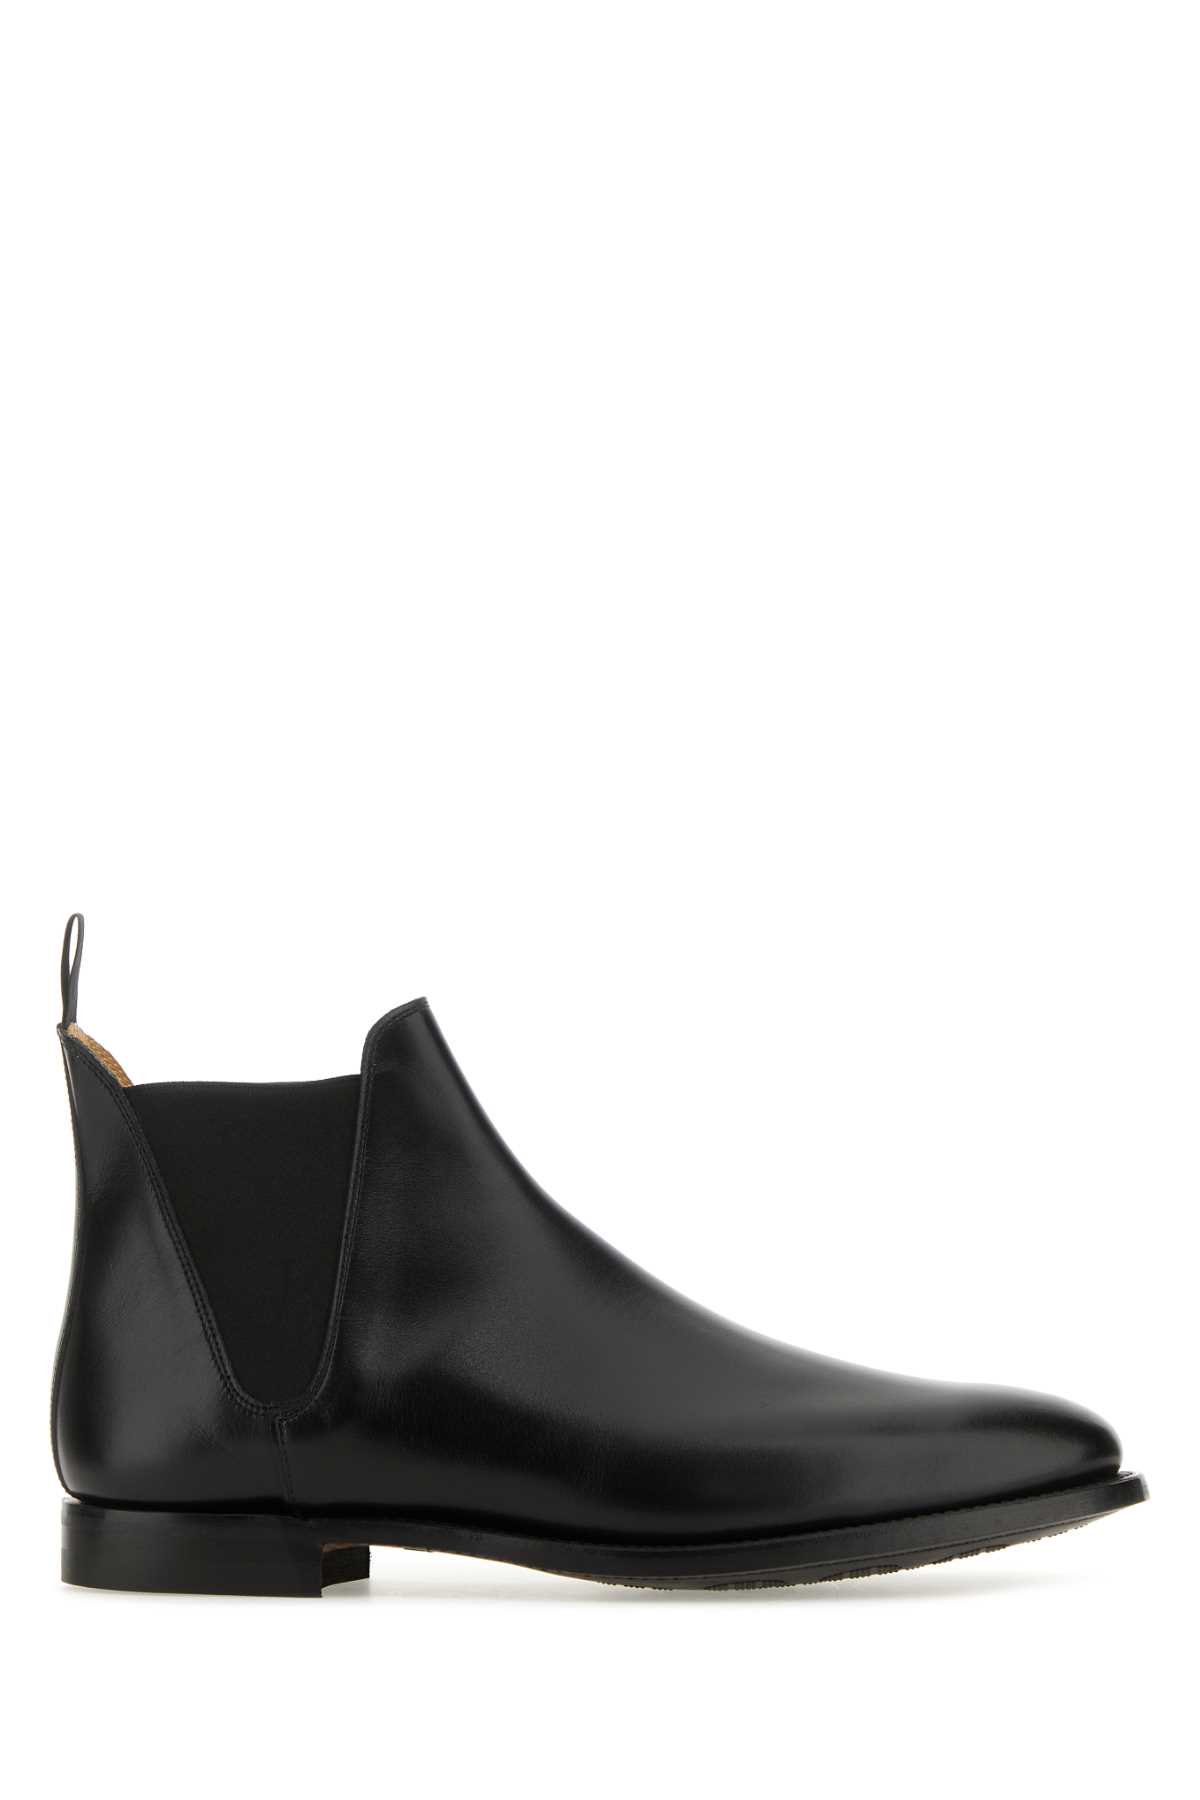 Black Leather Chelsea 8 Ankle Boots